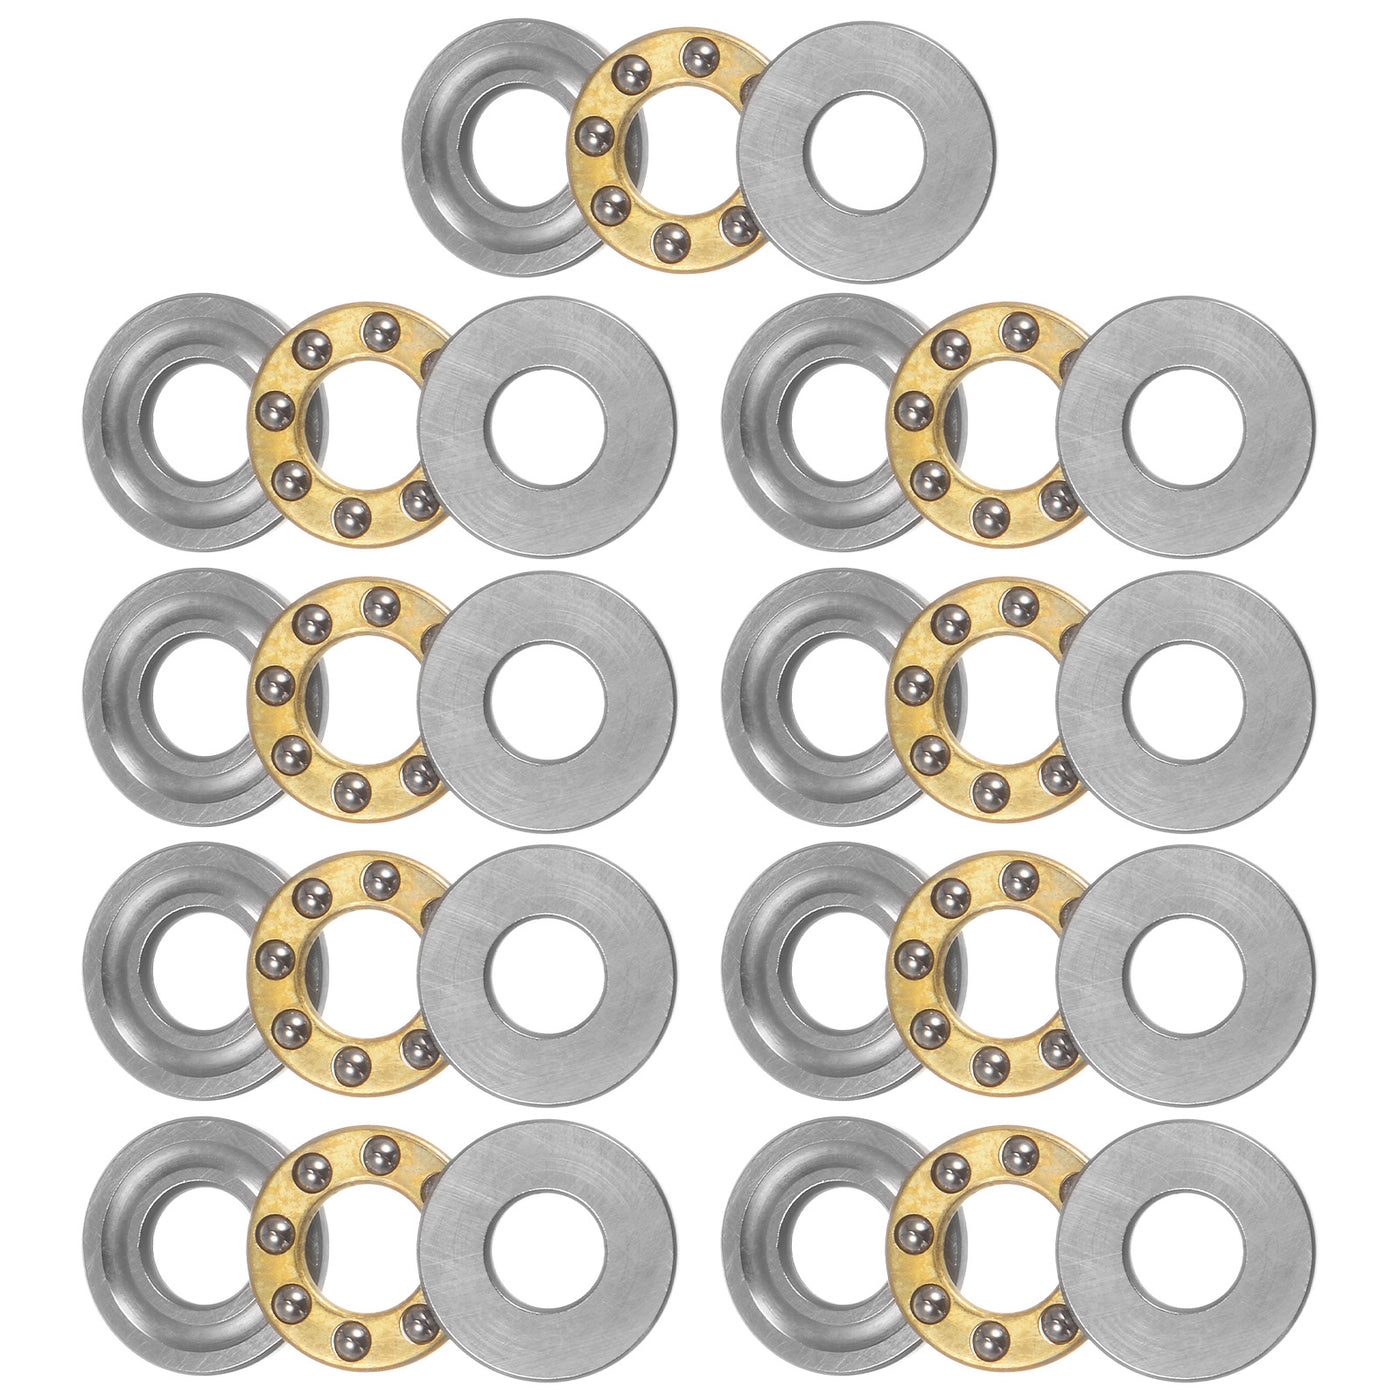 uxcell Uxcell F6-14M Thrust Ball Bearing 6x14x5mm Brass with Washers 9pcs